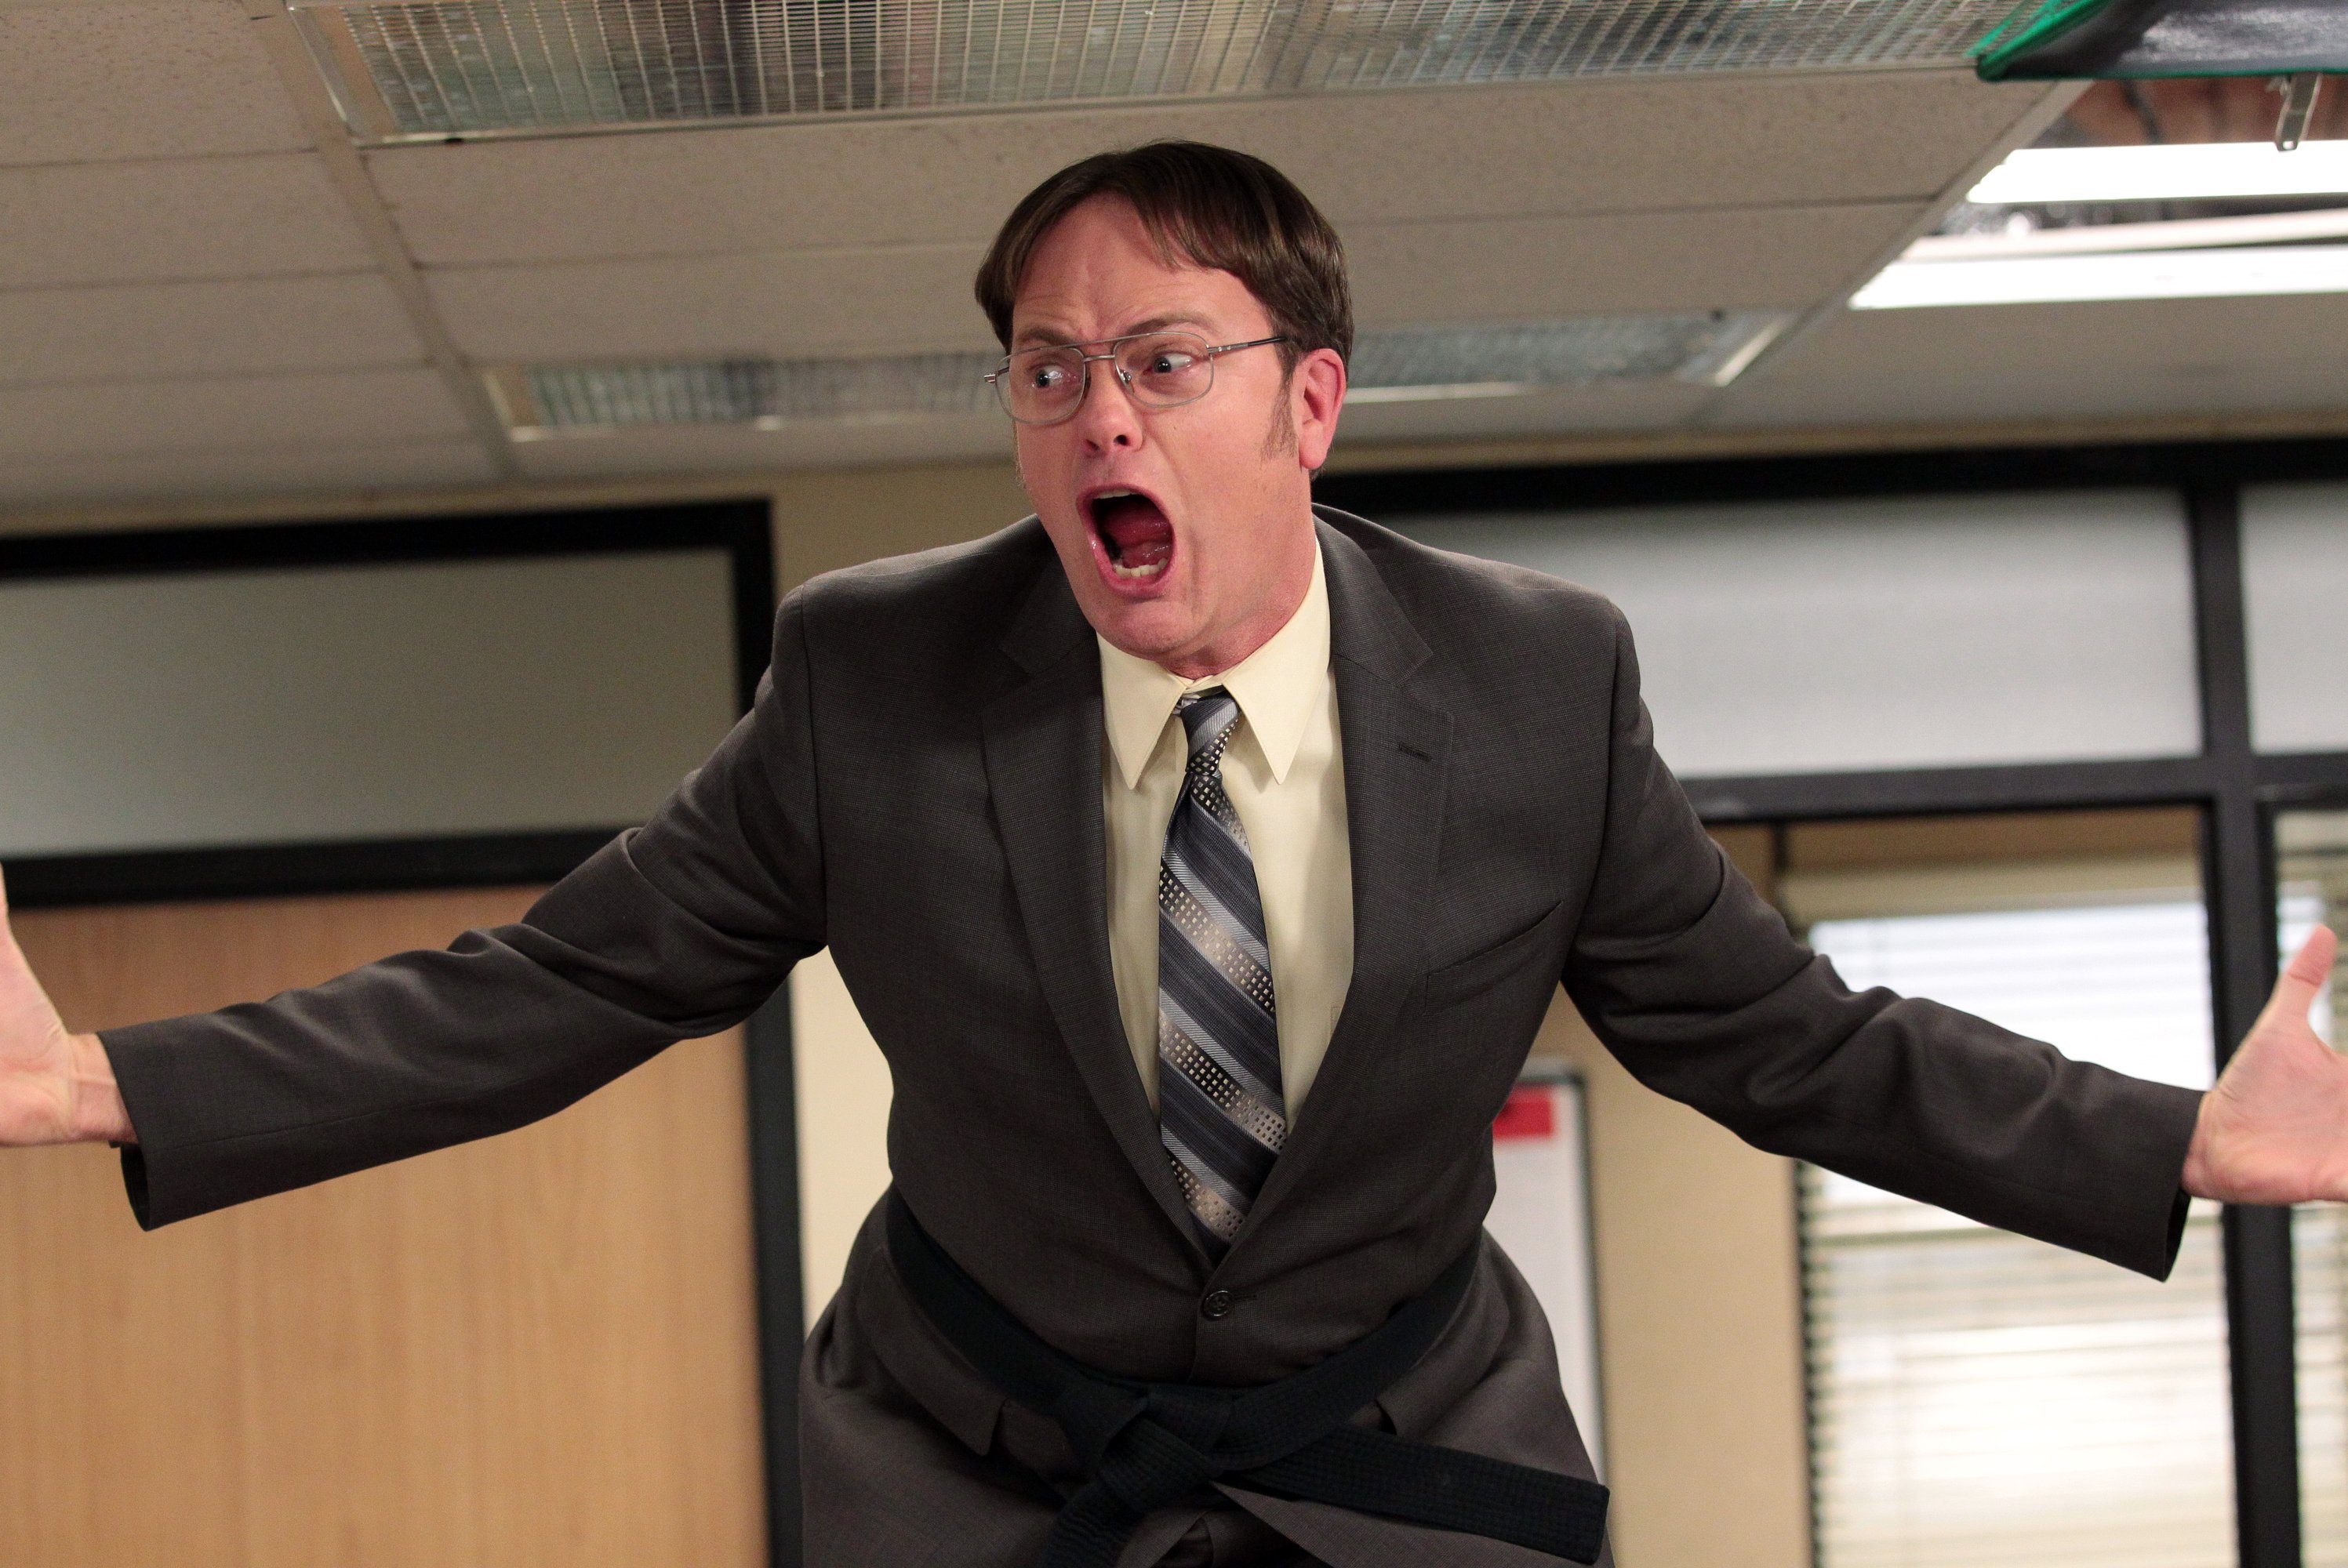 Actor Rainn Wilson as Dwight Schrute in "Livin' The Dream" Episode 921 of The Office.